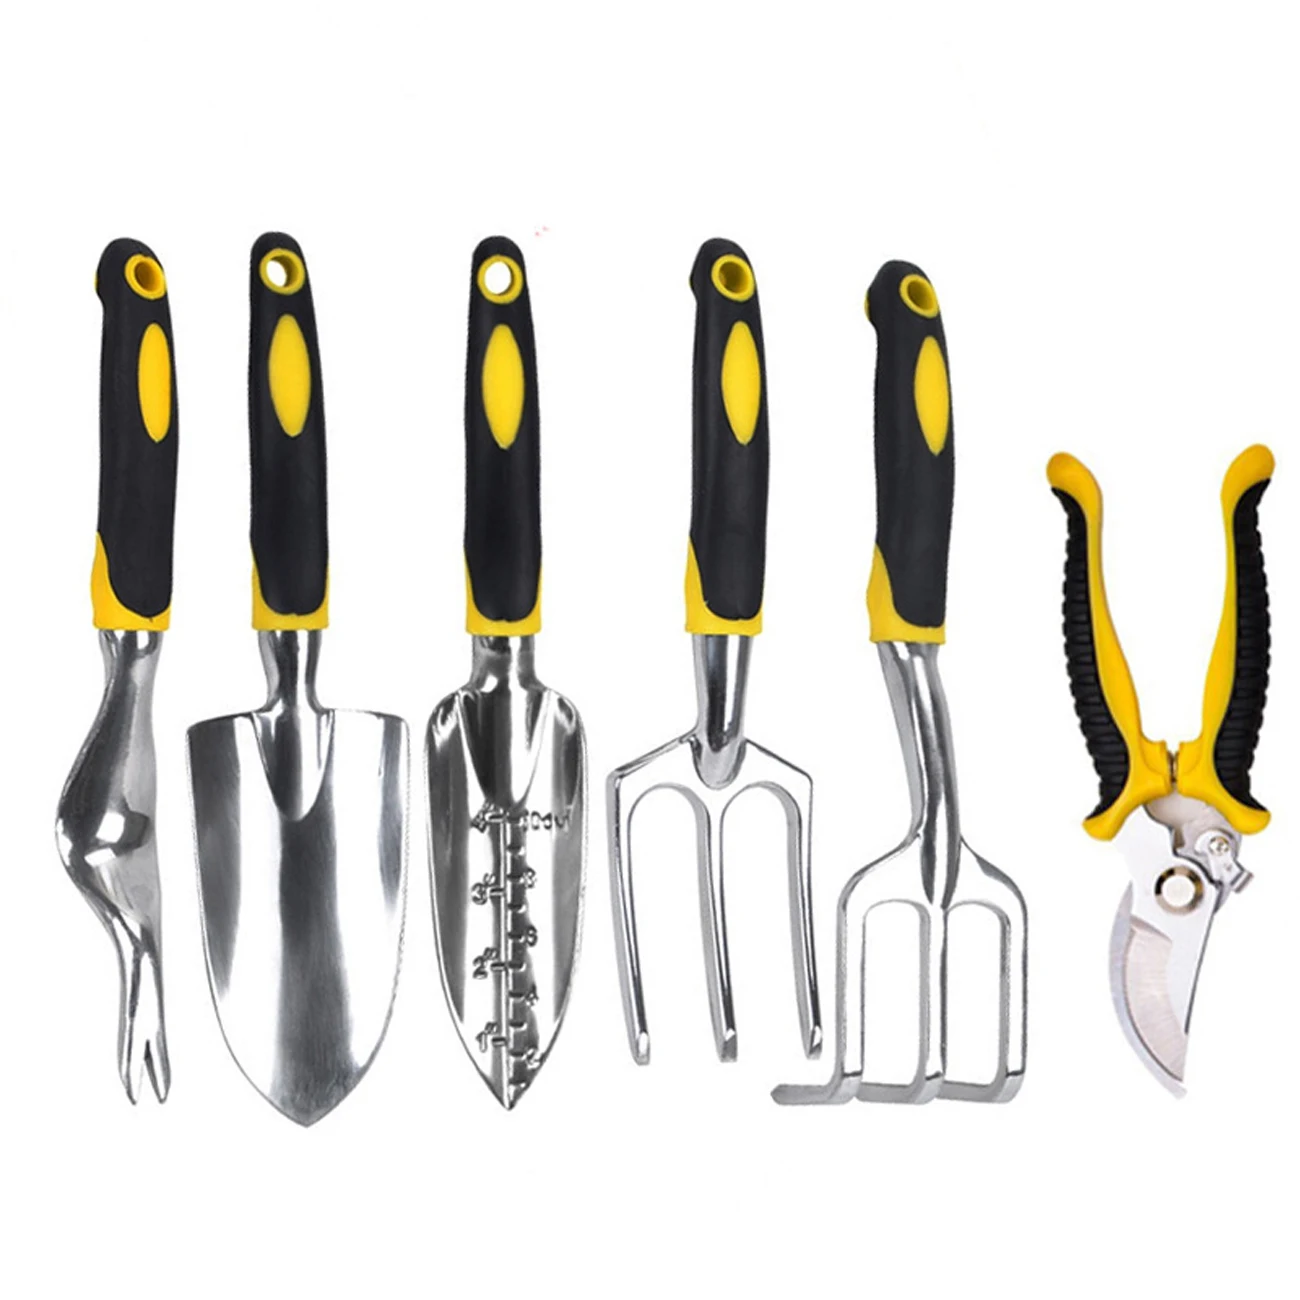 Hot sell 6pcs/lot gardening tools,planting flowers and vegetables,pruning shears,shovel, rake,fork,weeding,root removal